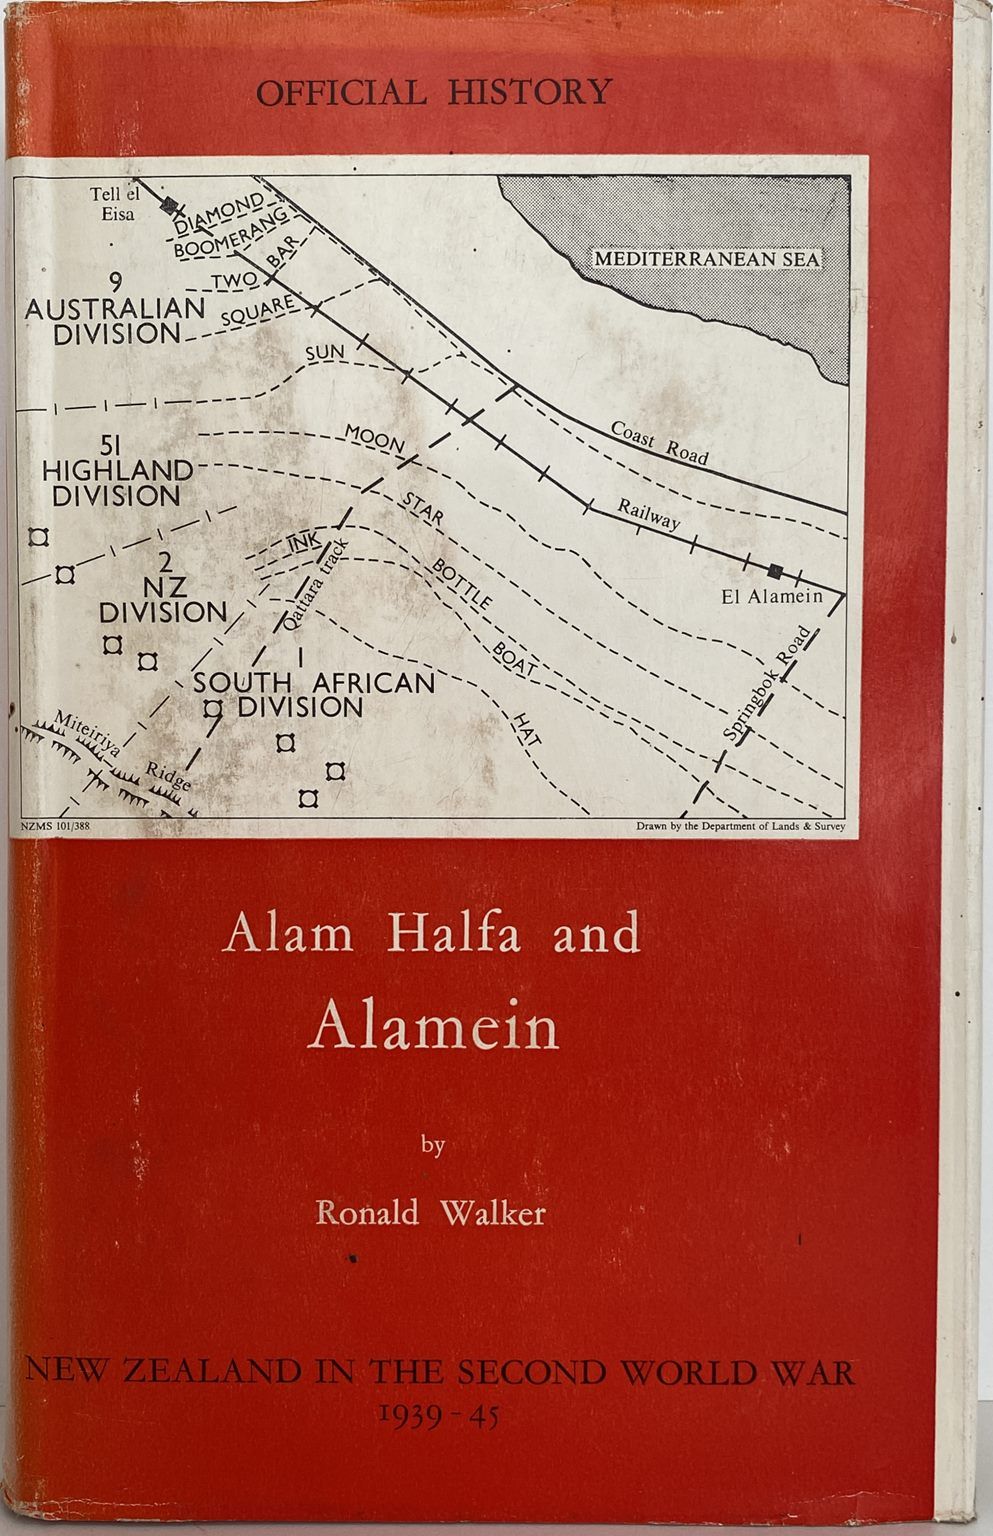 ALAM HALFA and ALAMEIN: History of New Zealand in the Second World War 1939-45